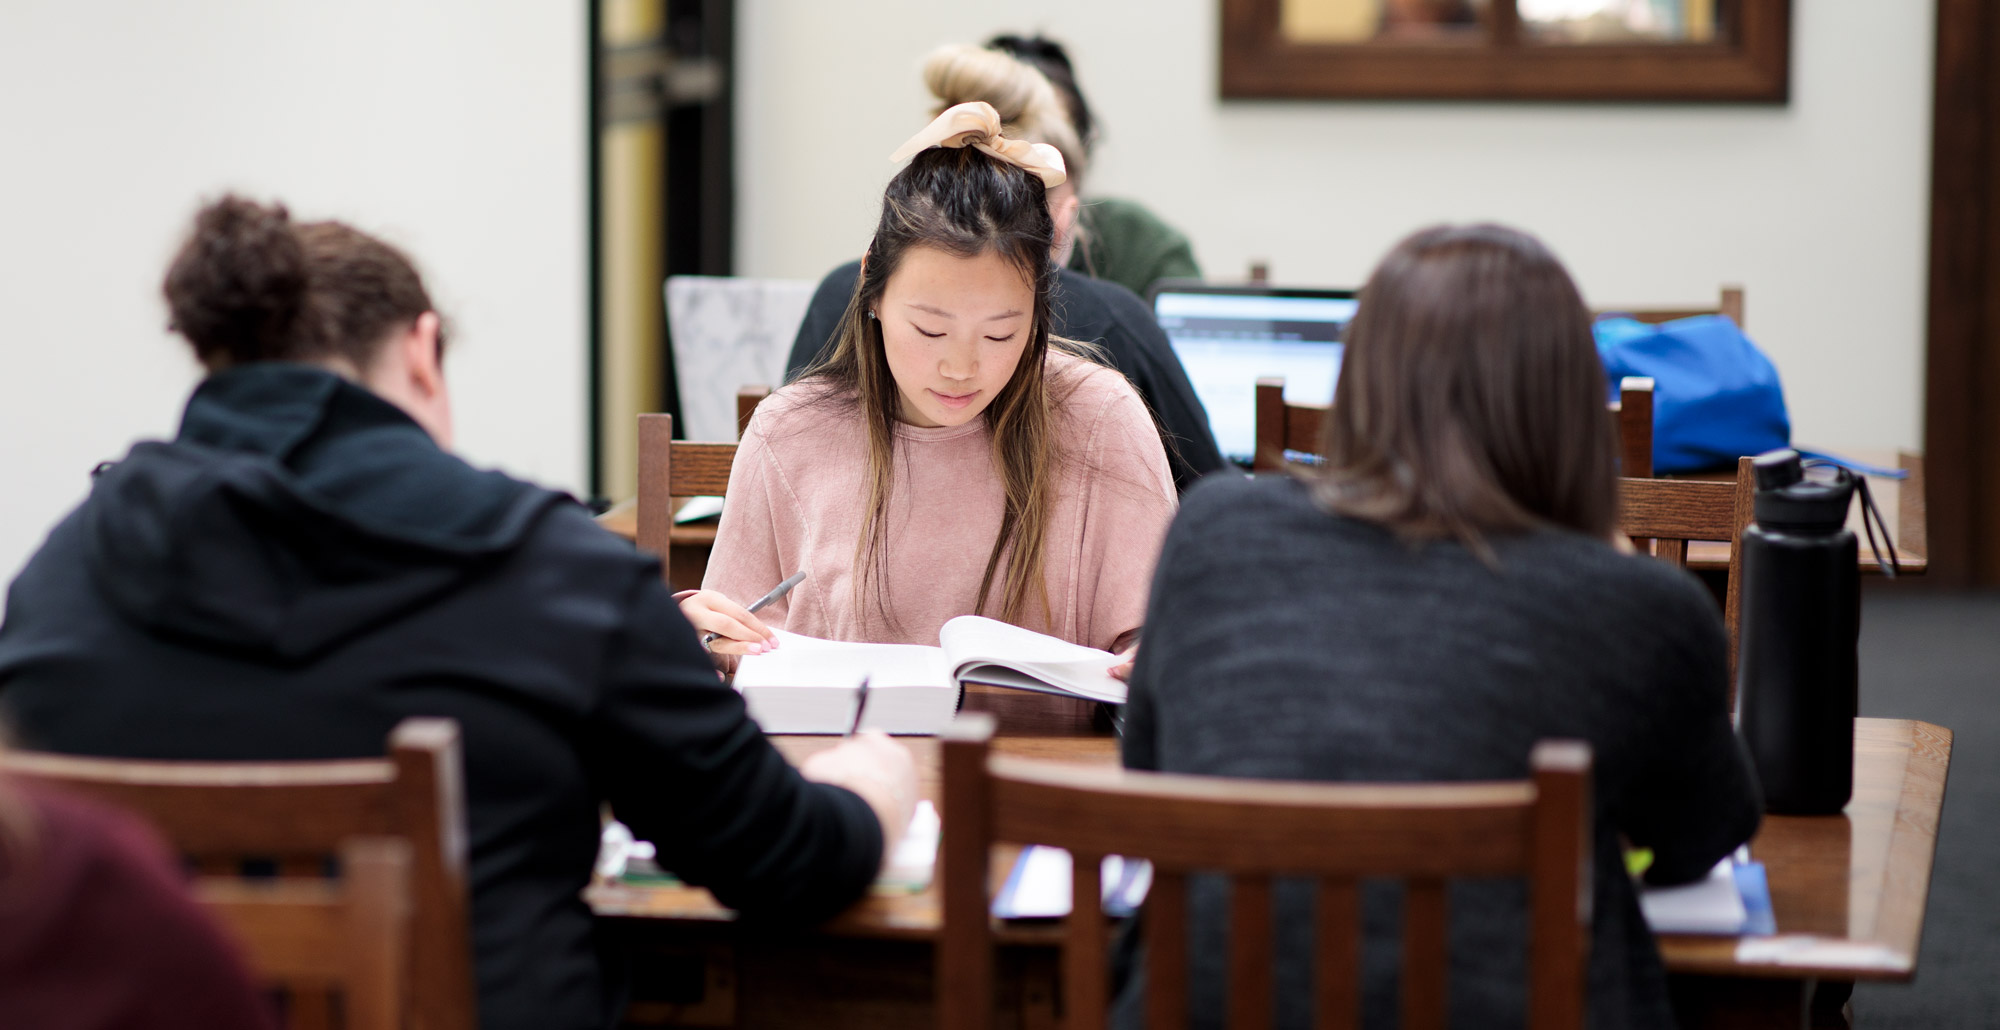 Student studies with peers in the library.